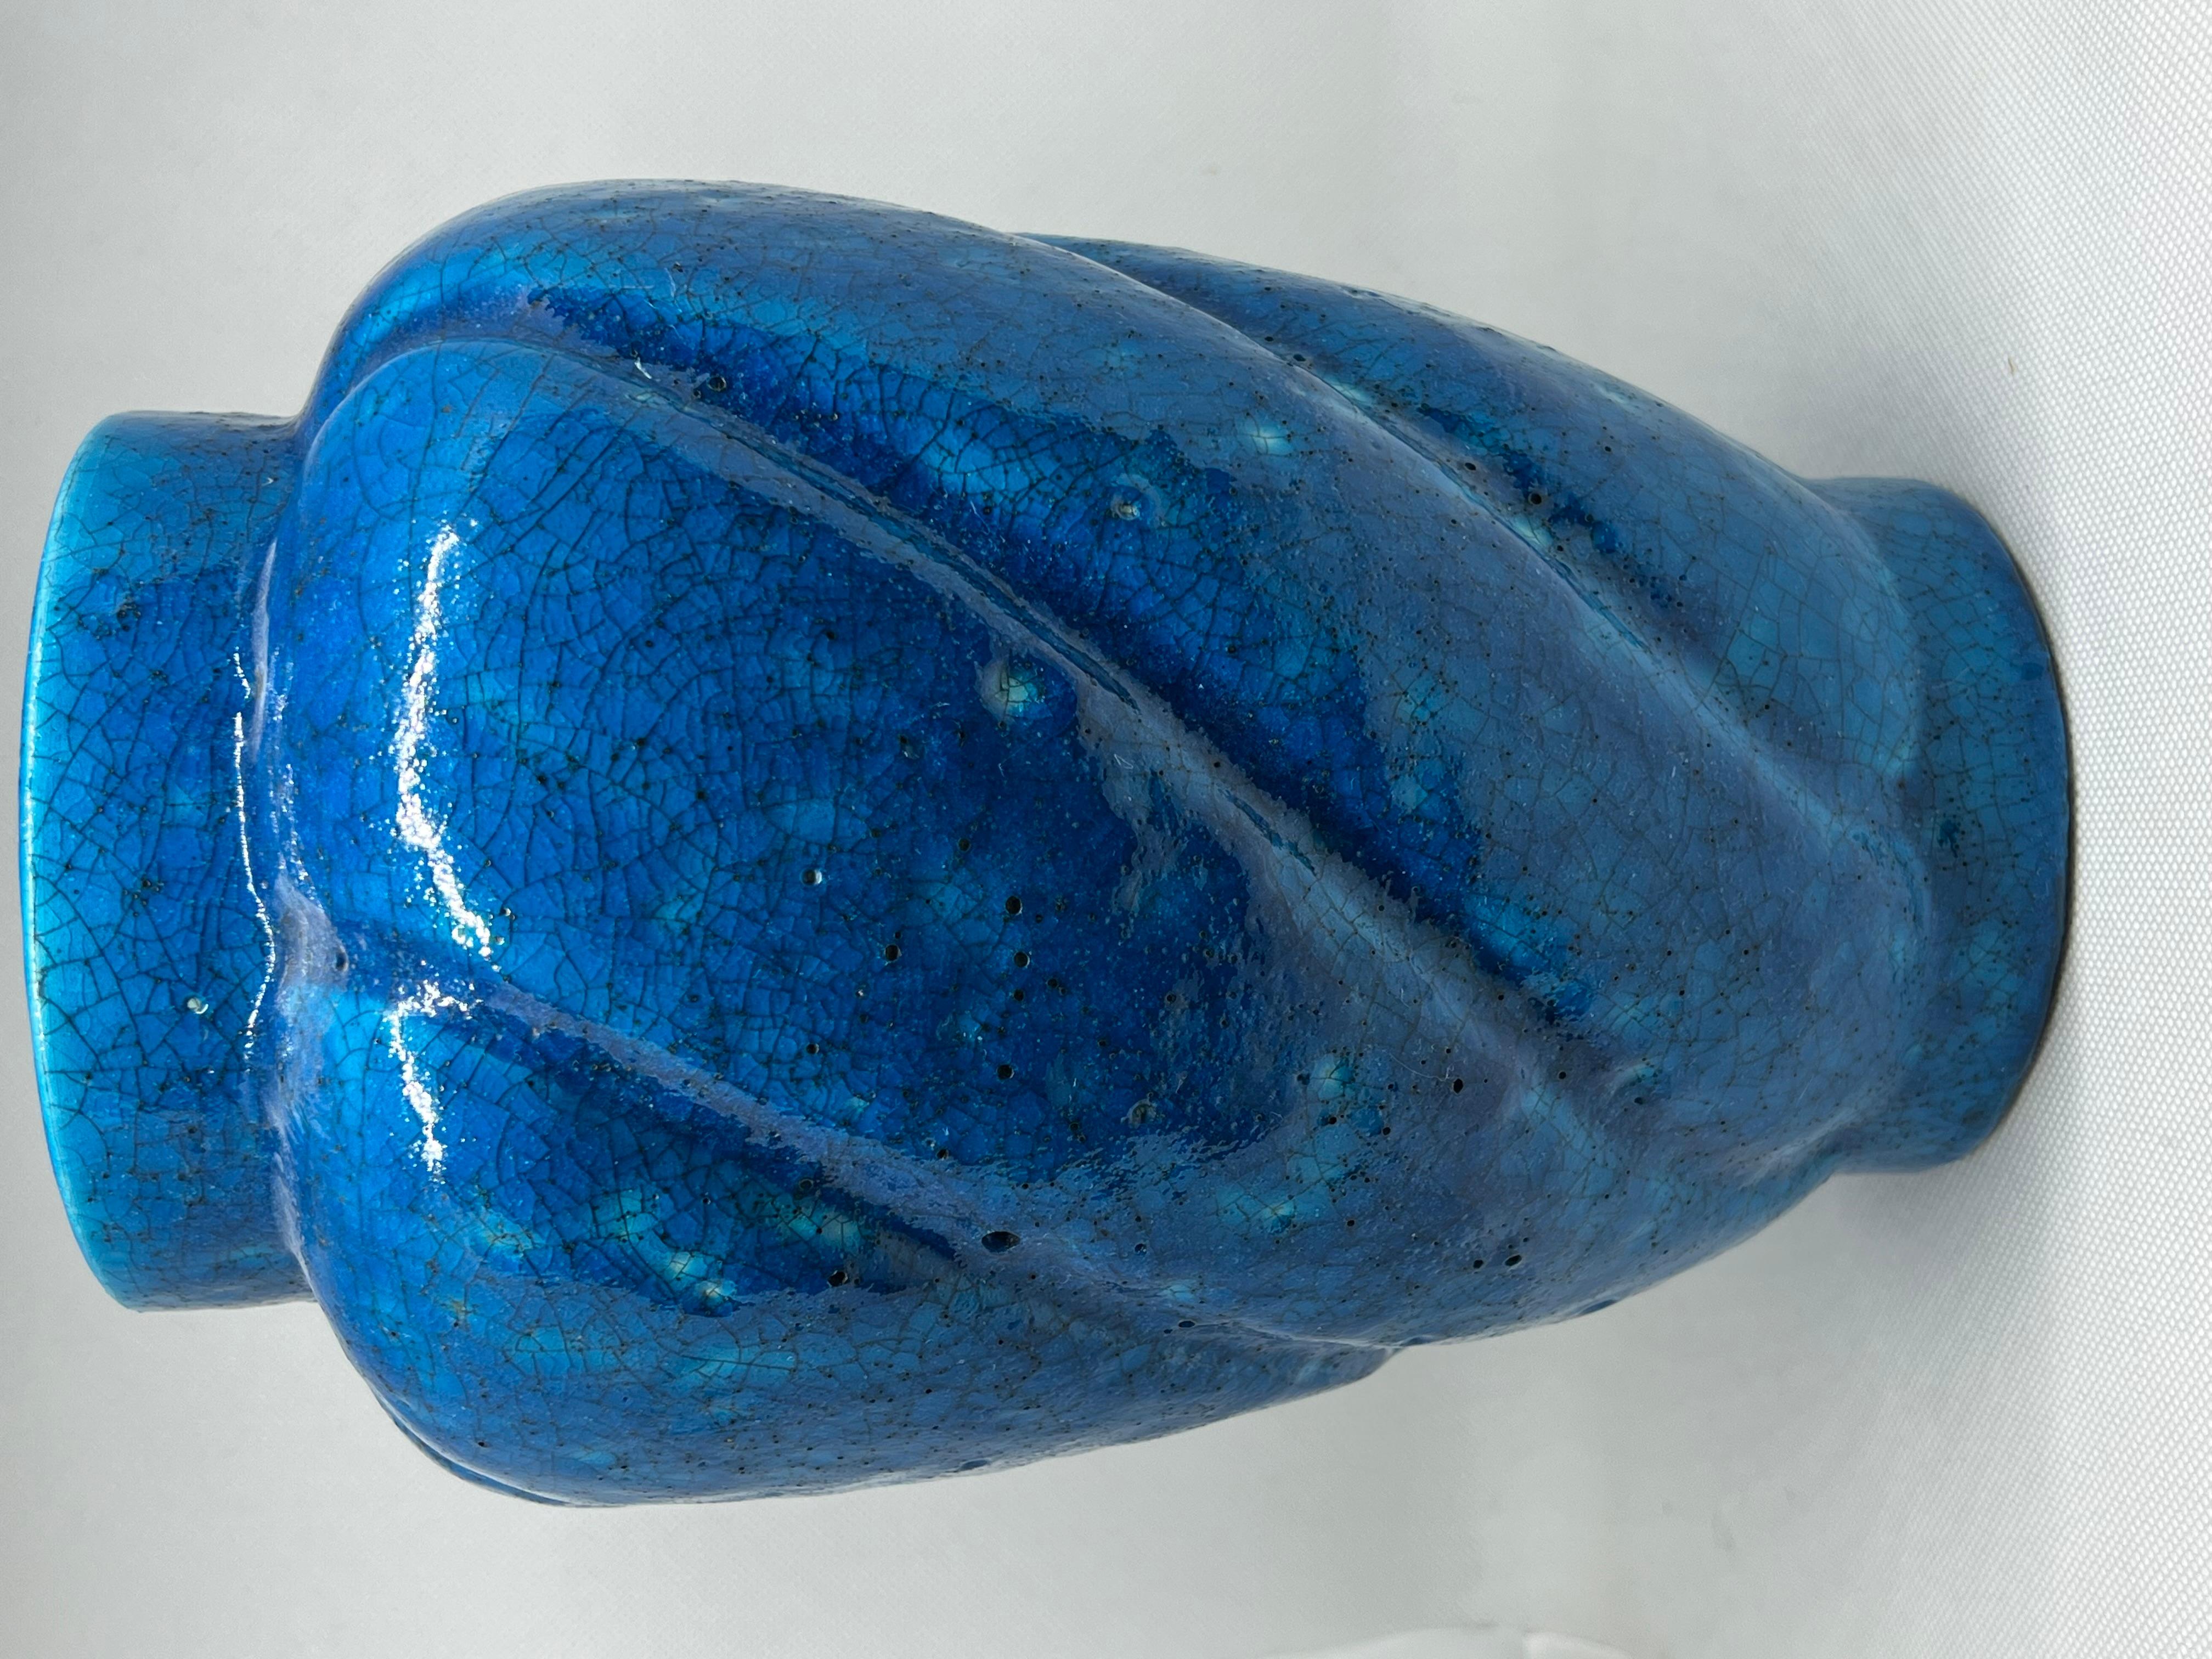 French Turquoise Blue Faience Vase by Edmond Lachenal, France, circa 1930